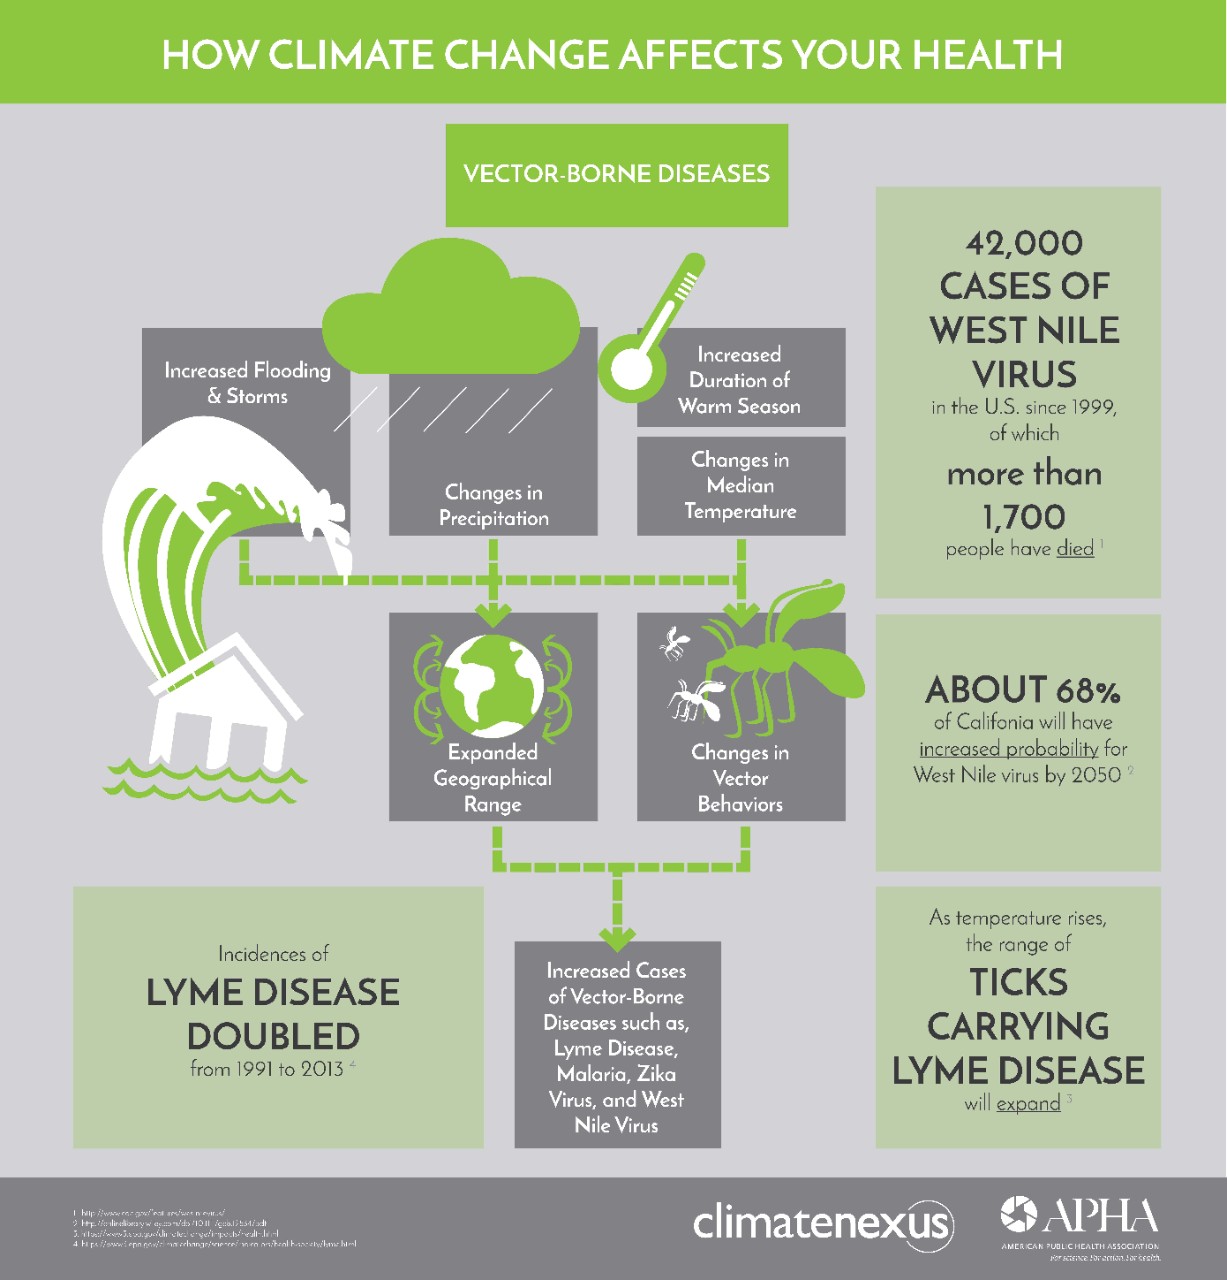 APHA_how_climate_affects_health_vector-borne_diseases